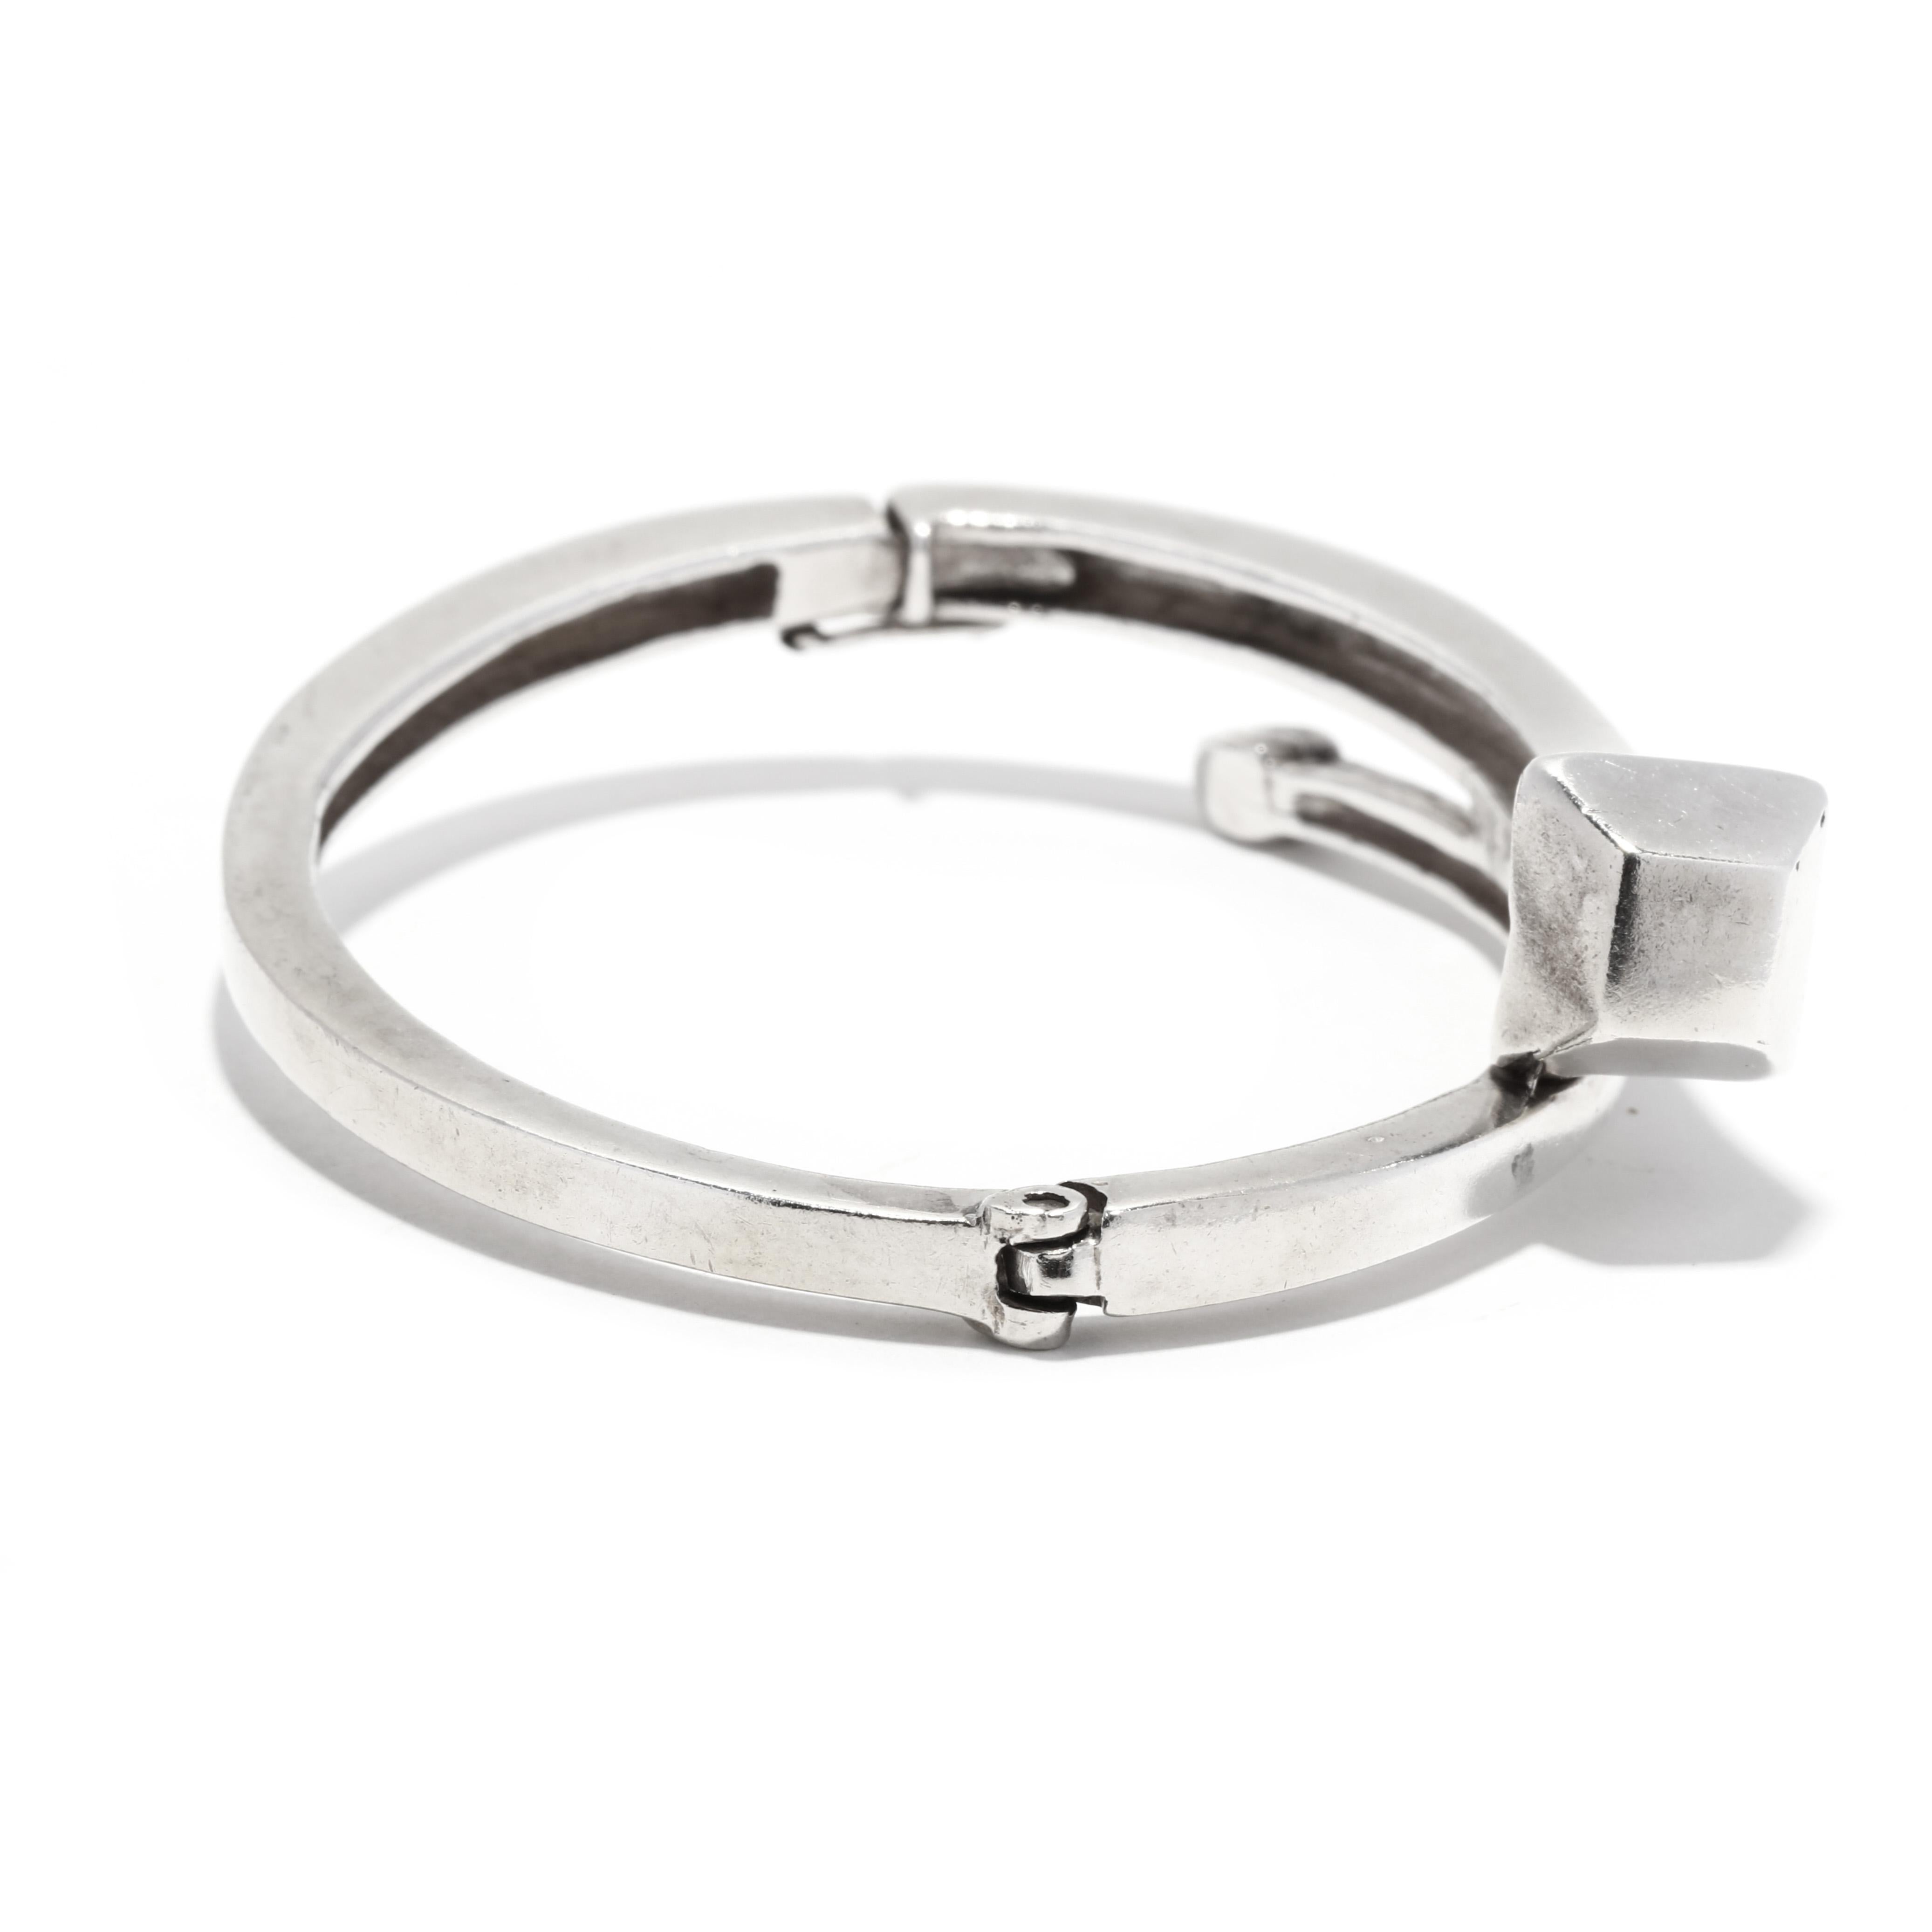 This minimalist nail shaped crossover bangle bracelet is a perfect accessory to elevate any look! Crafted in sterling silver, this bracelet measures 6.25 inches and is the perfect piece for everyday wear. Its unique crossover shape gives it an